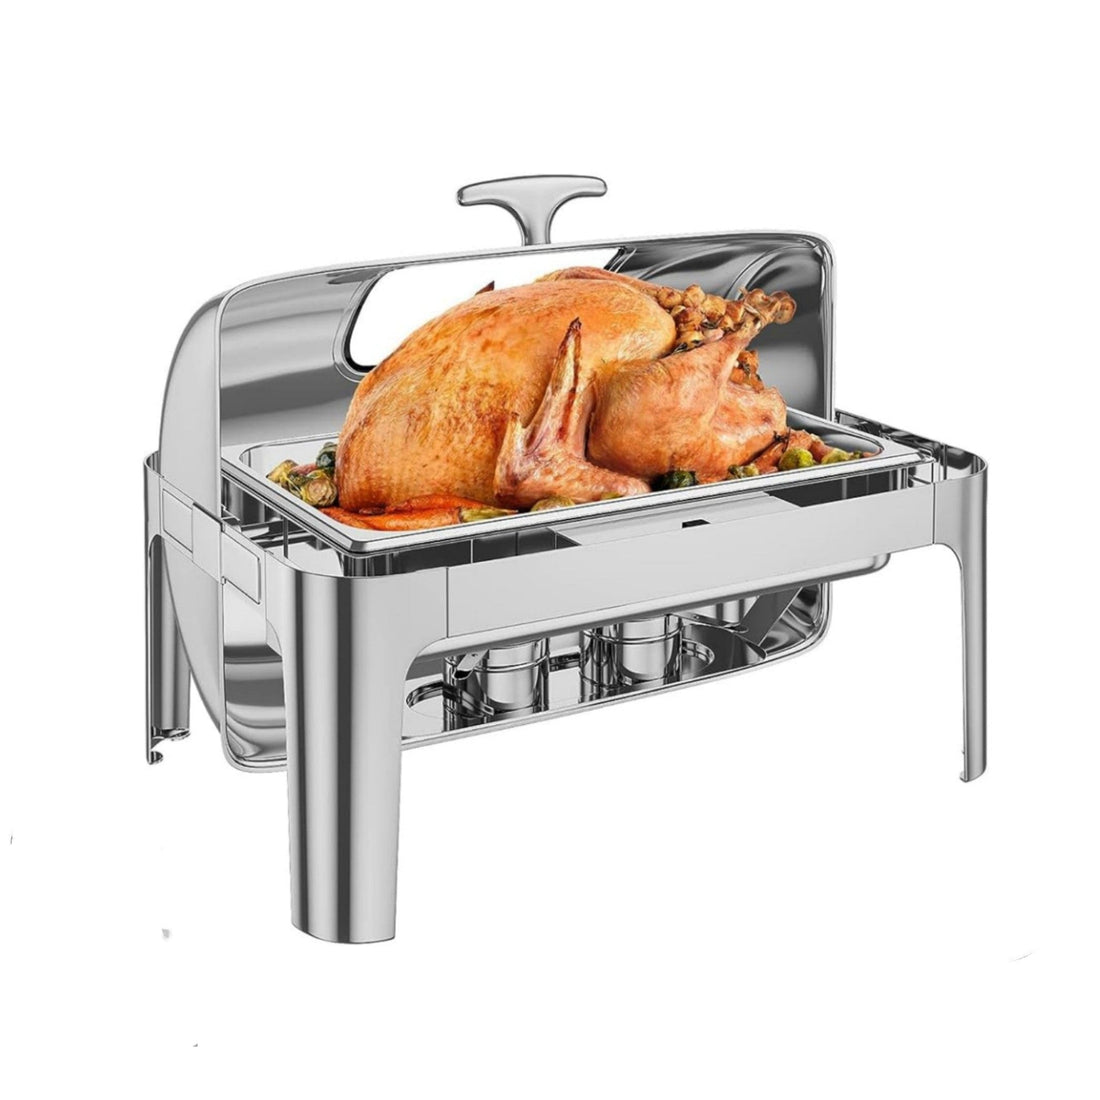 Buffet Set 9QT Stainless Steel Food Warmer with Transparent Window